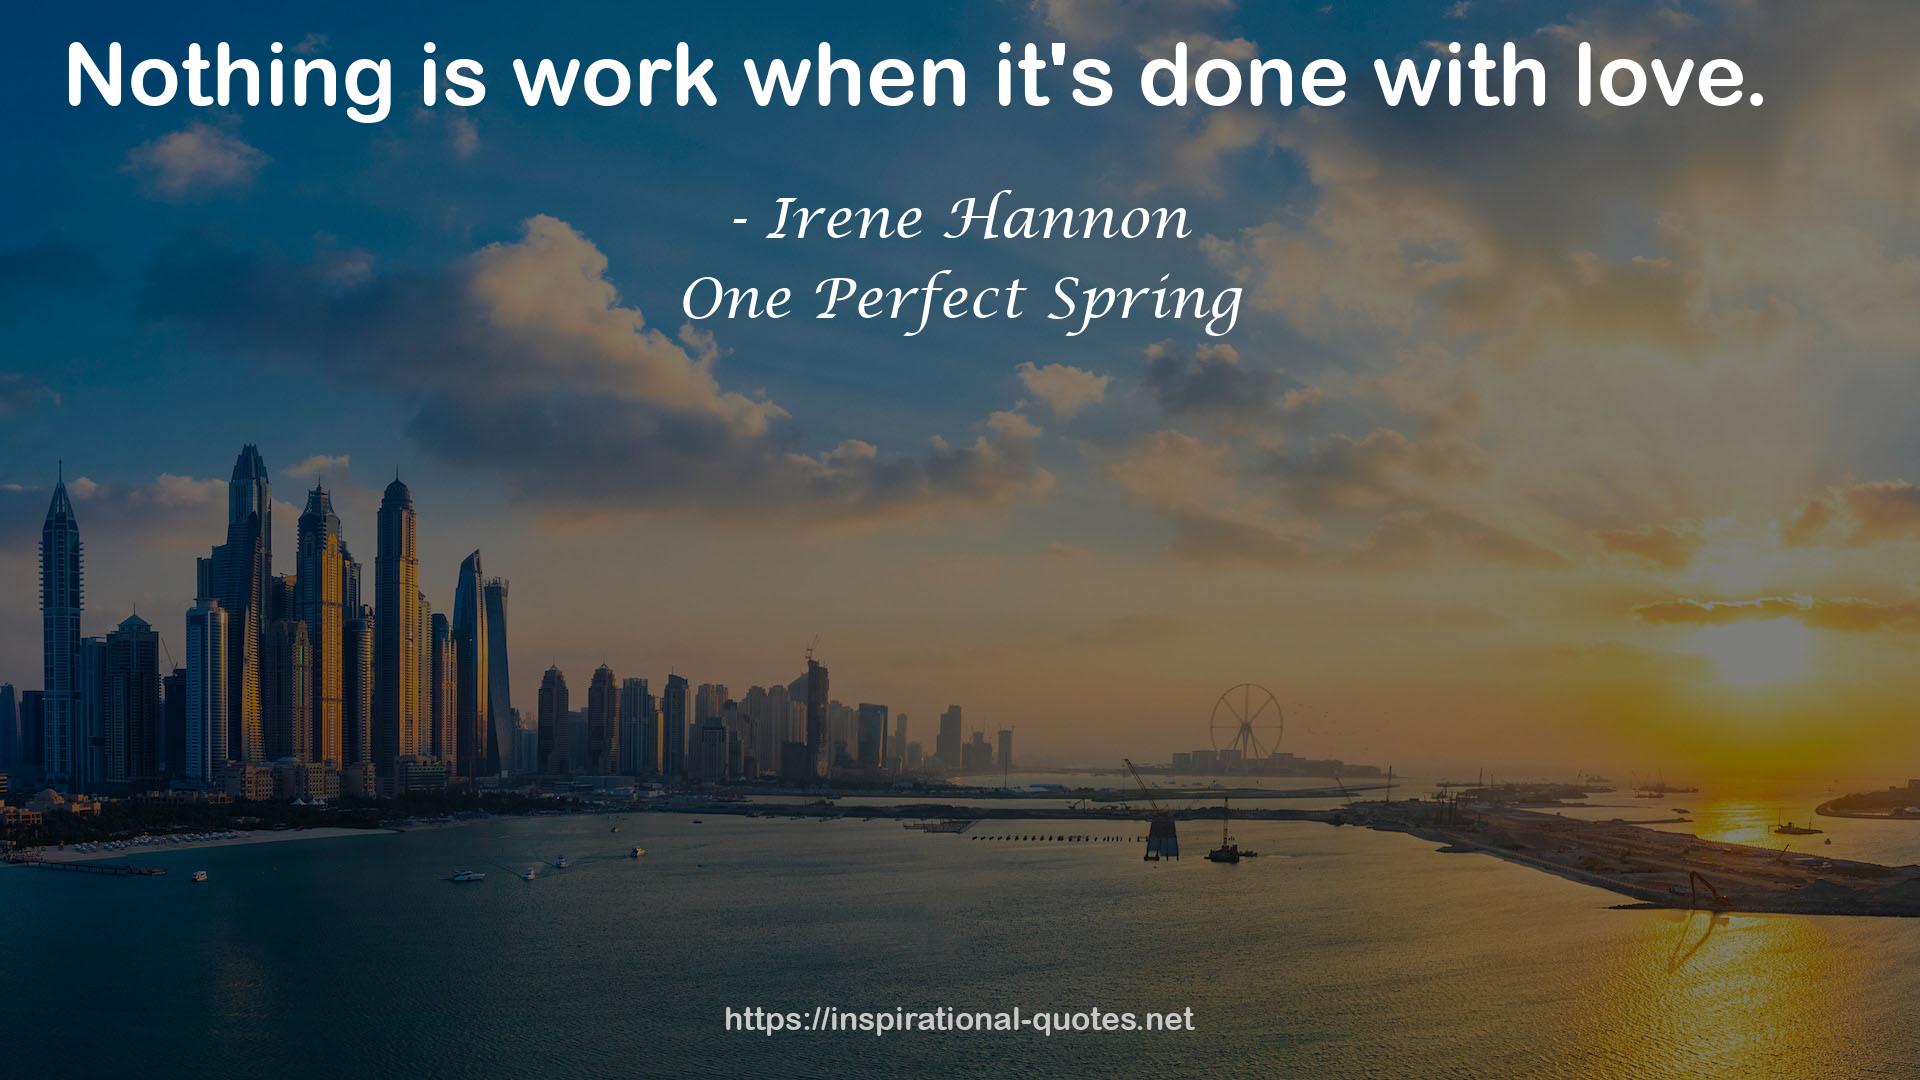 One Perfect Spring QUOTES